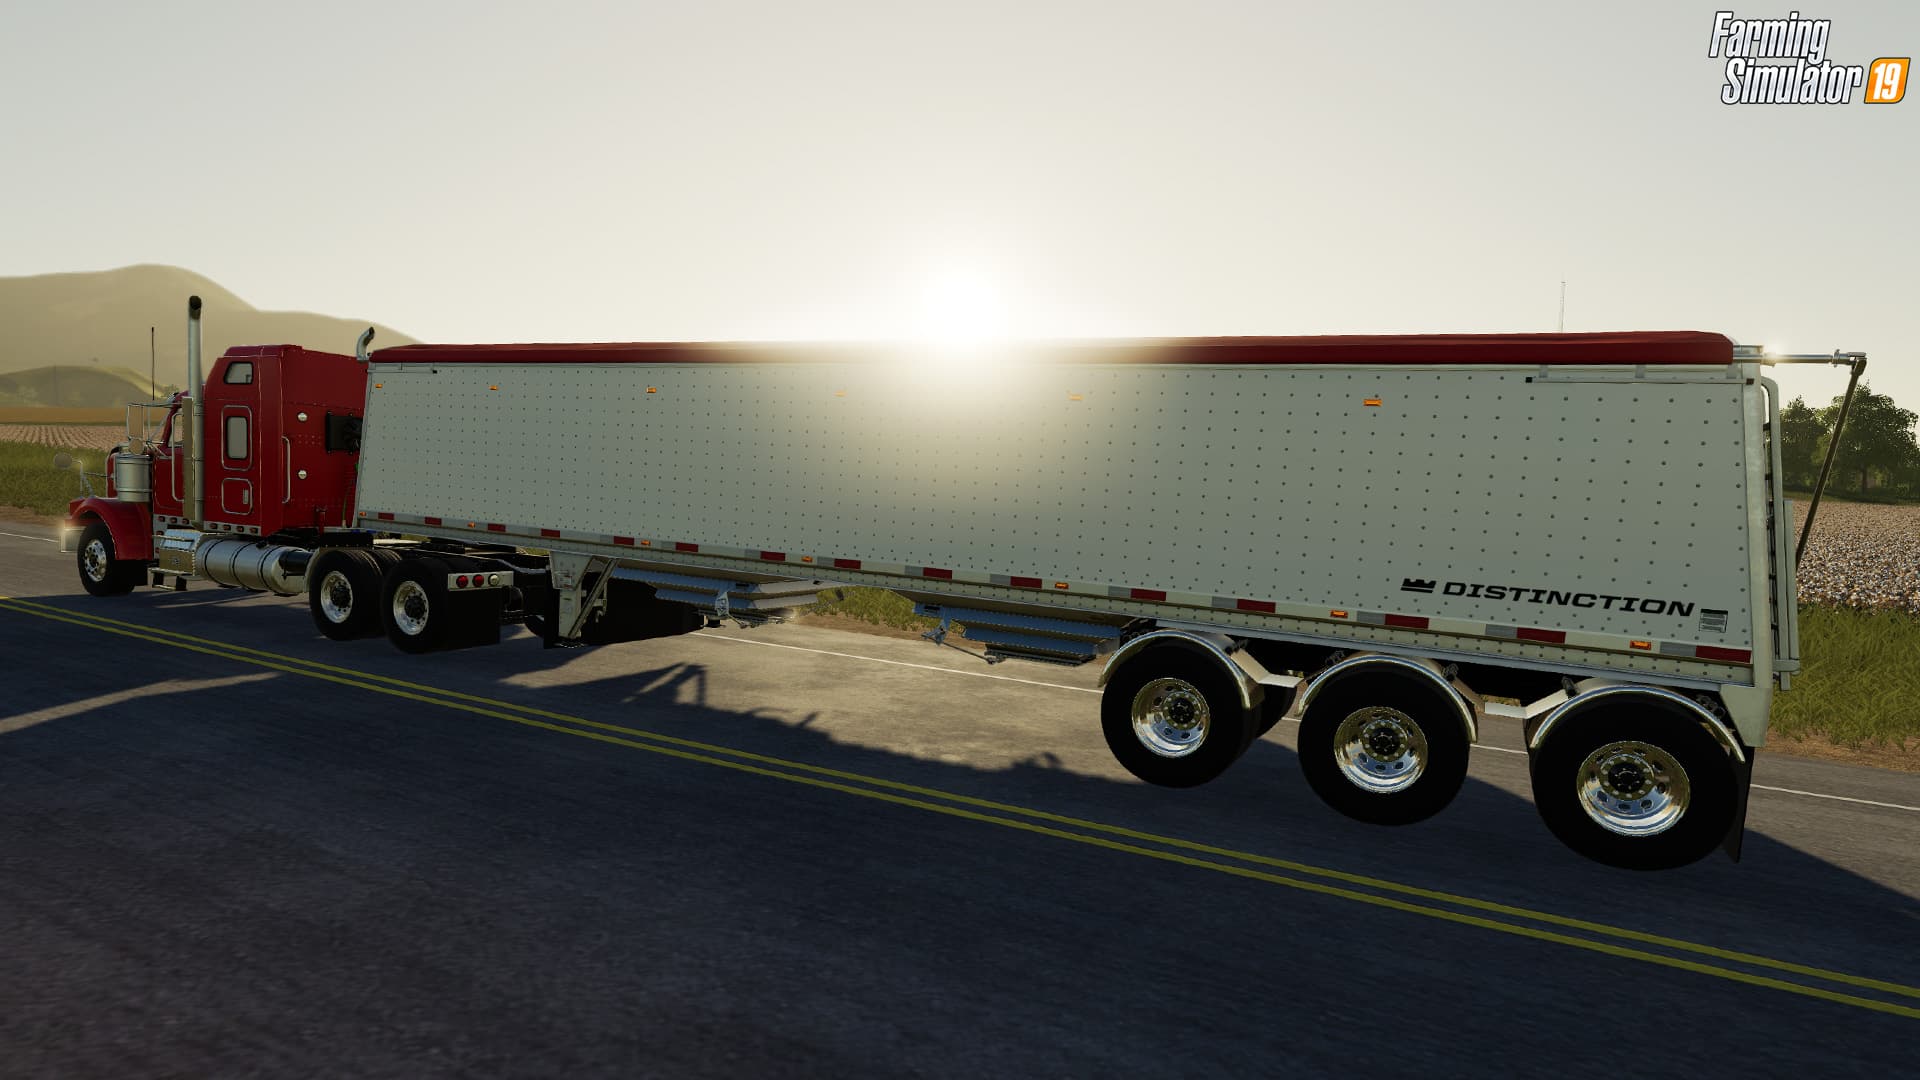 Lode King comes to American Truck Simulator - Lode King